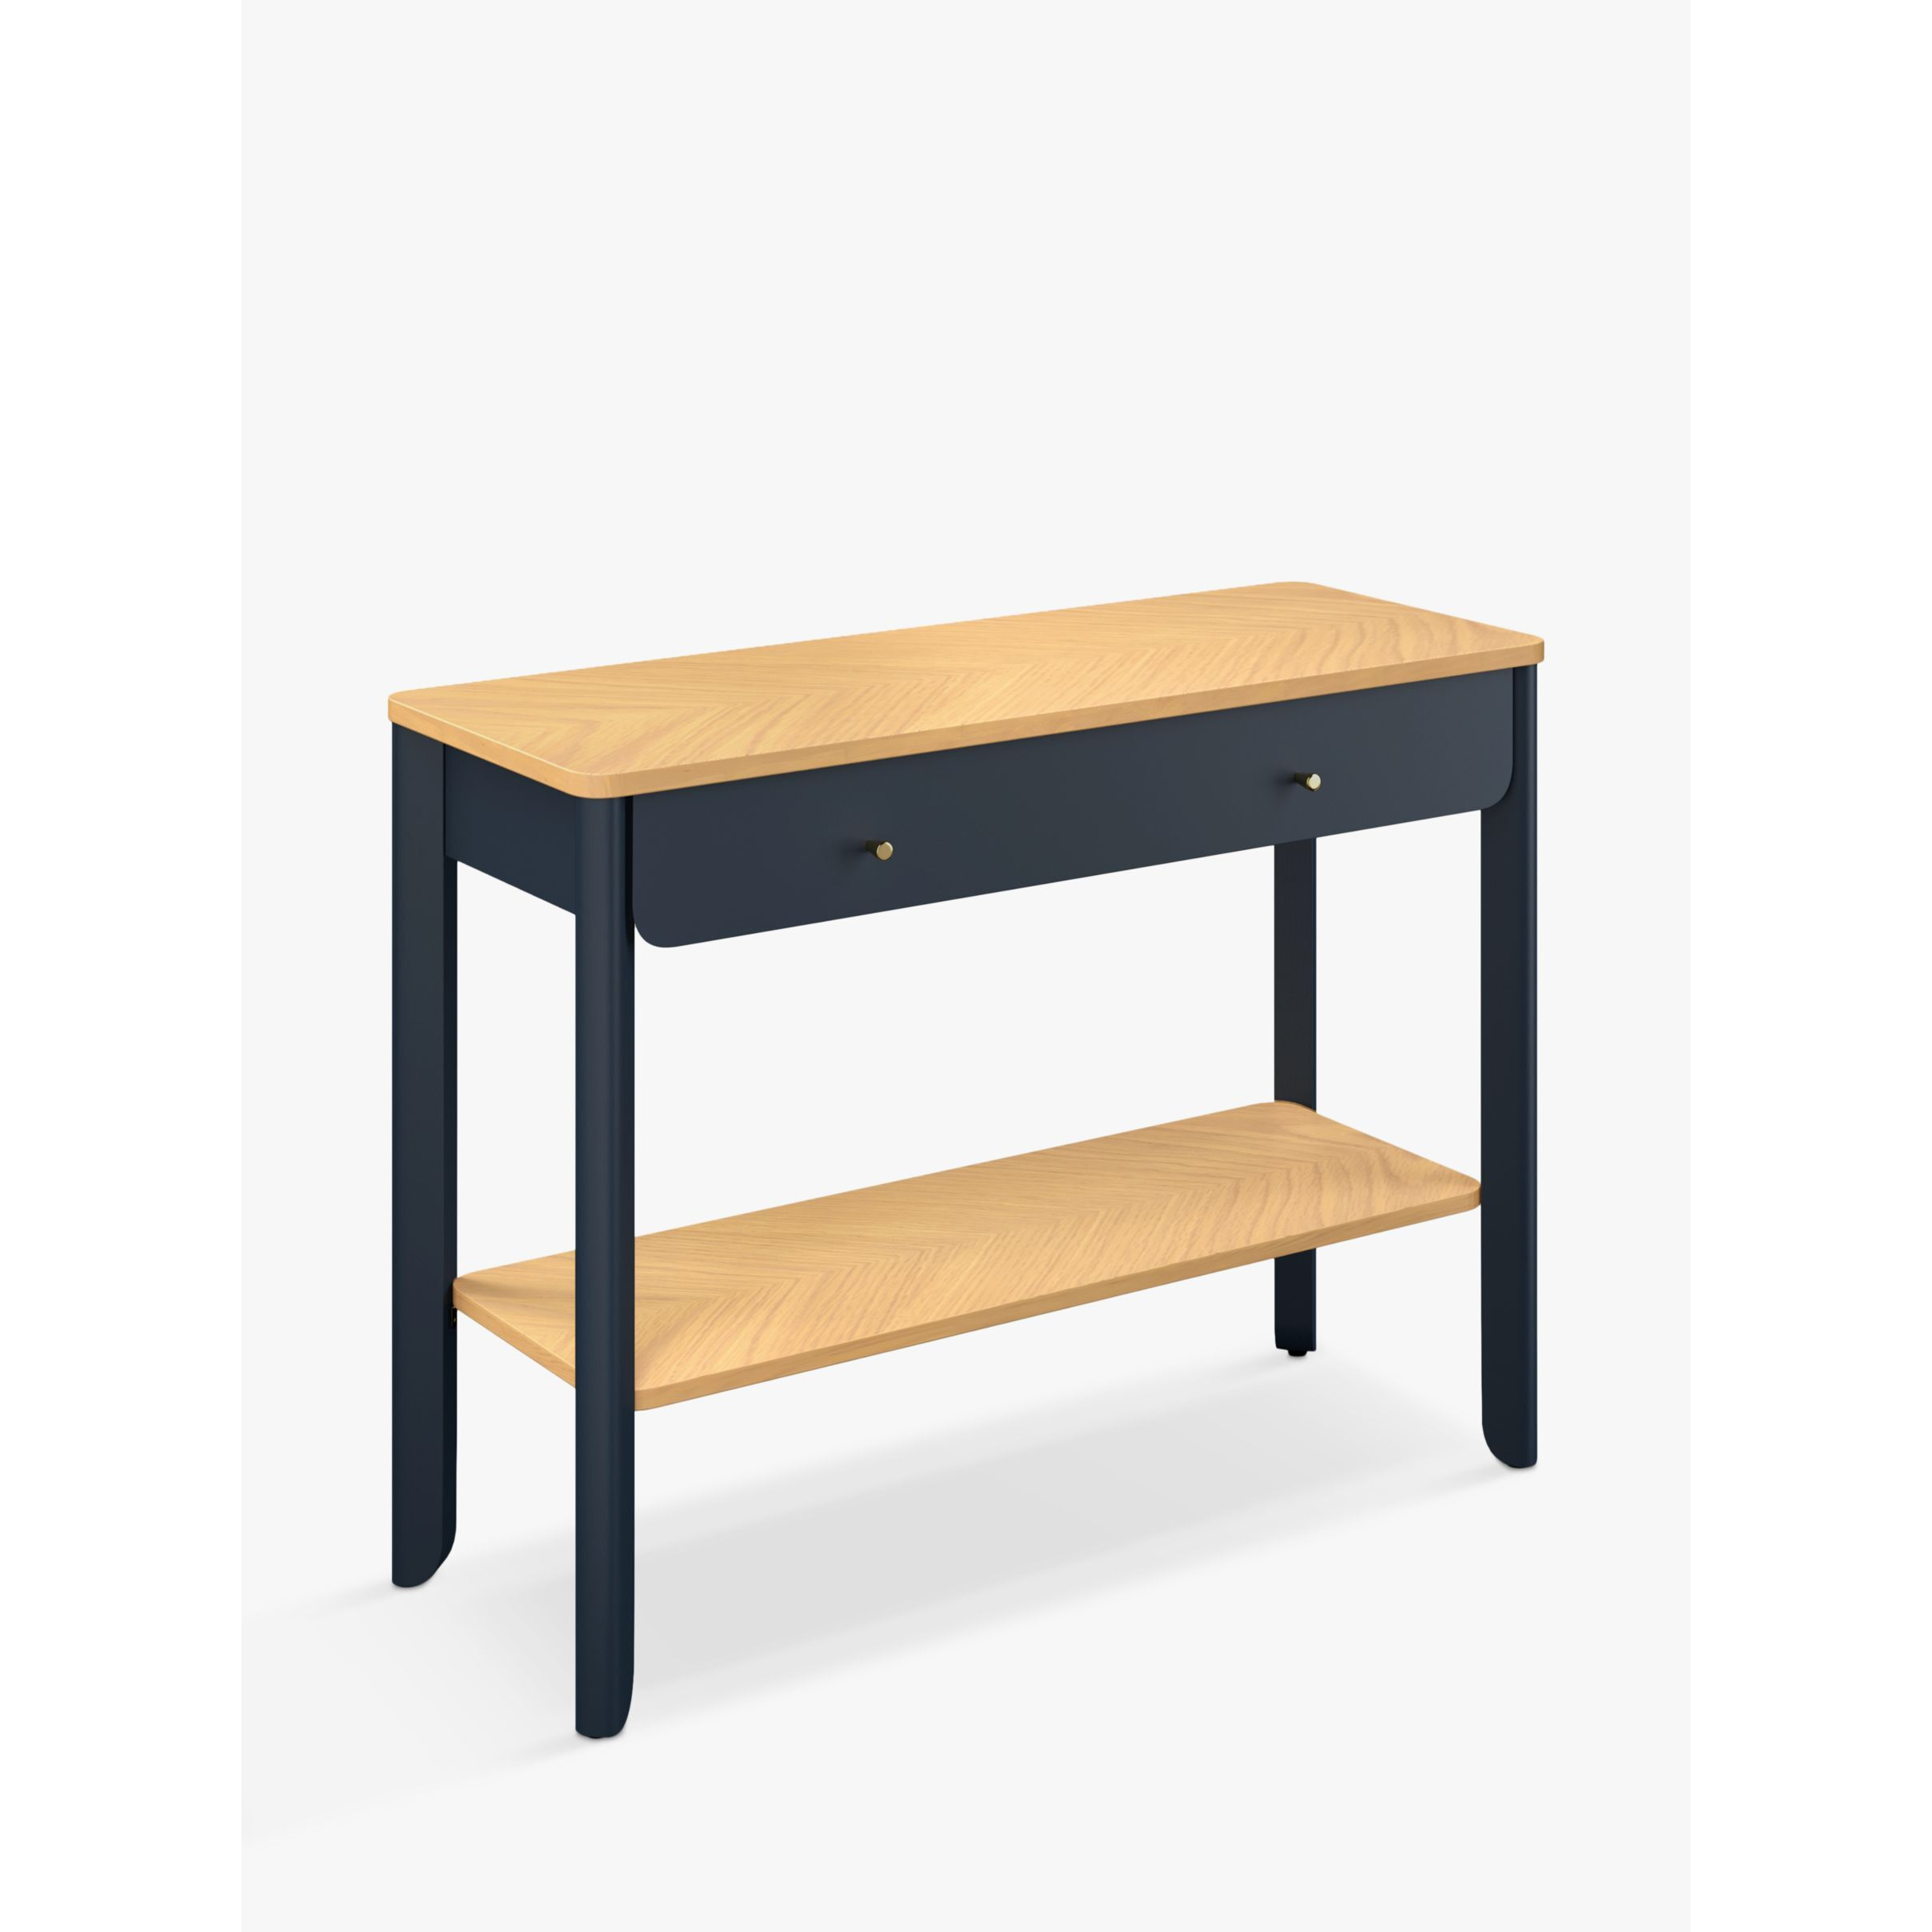 John Lewis ANYDAY Fern Console Table - image 1